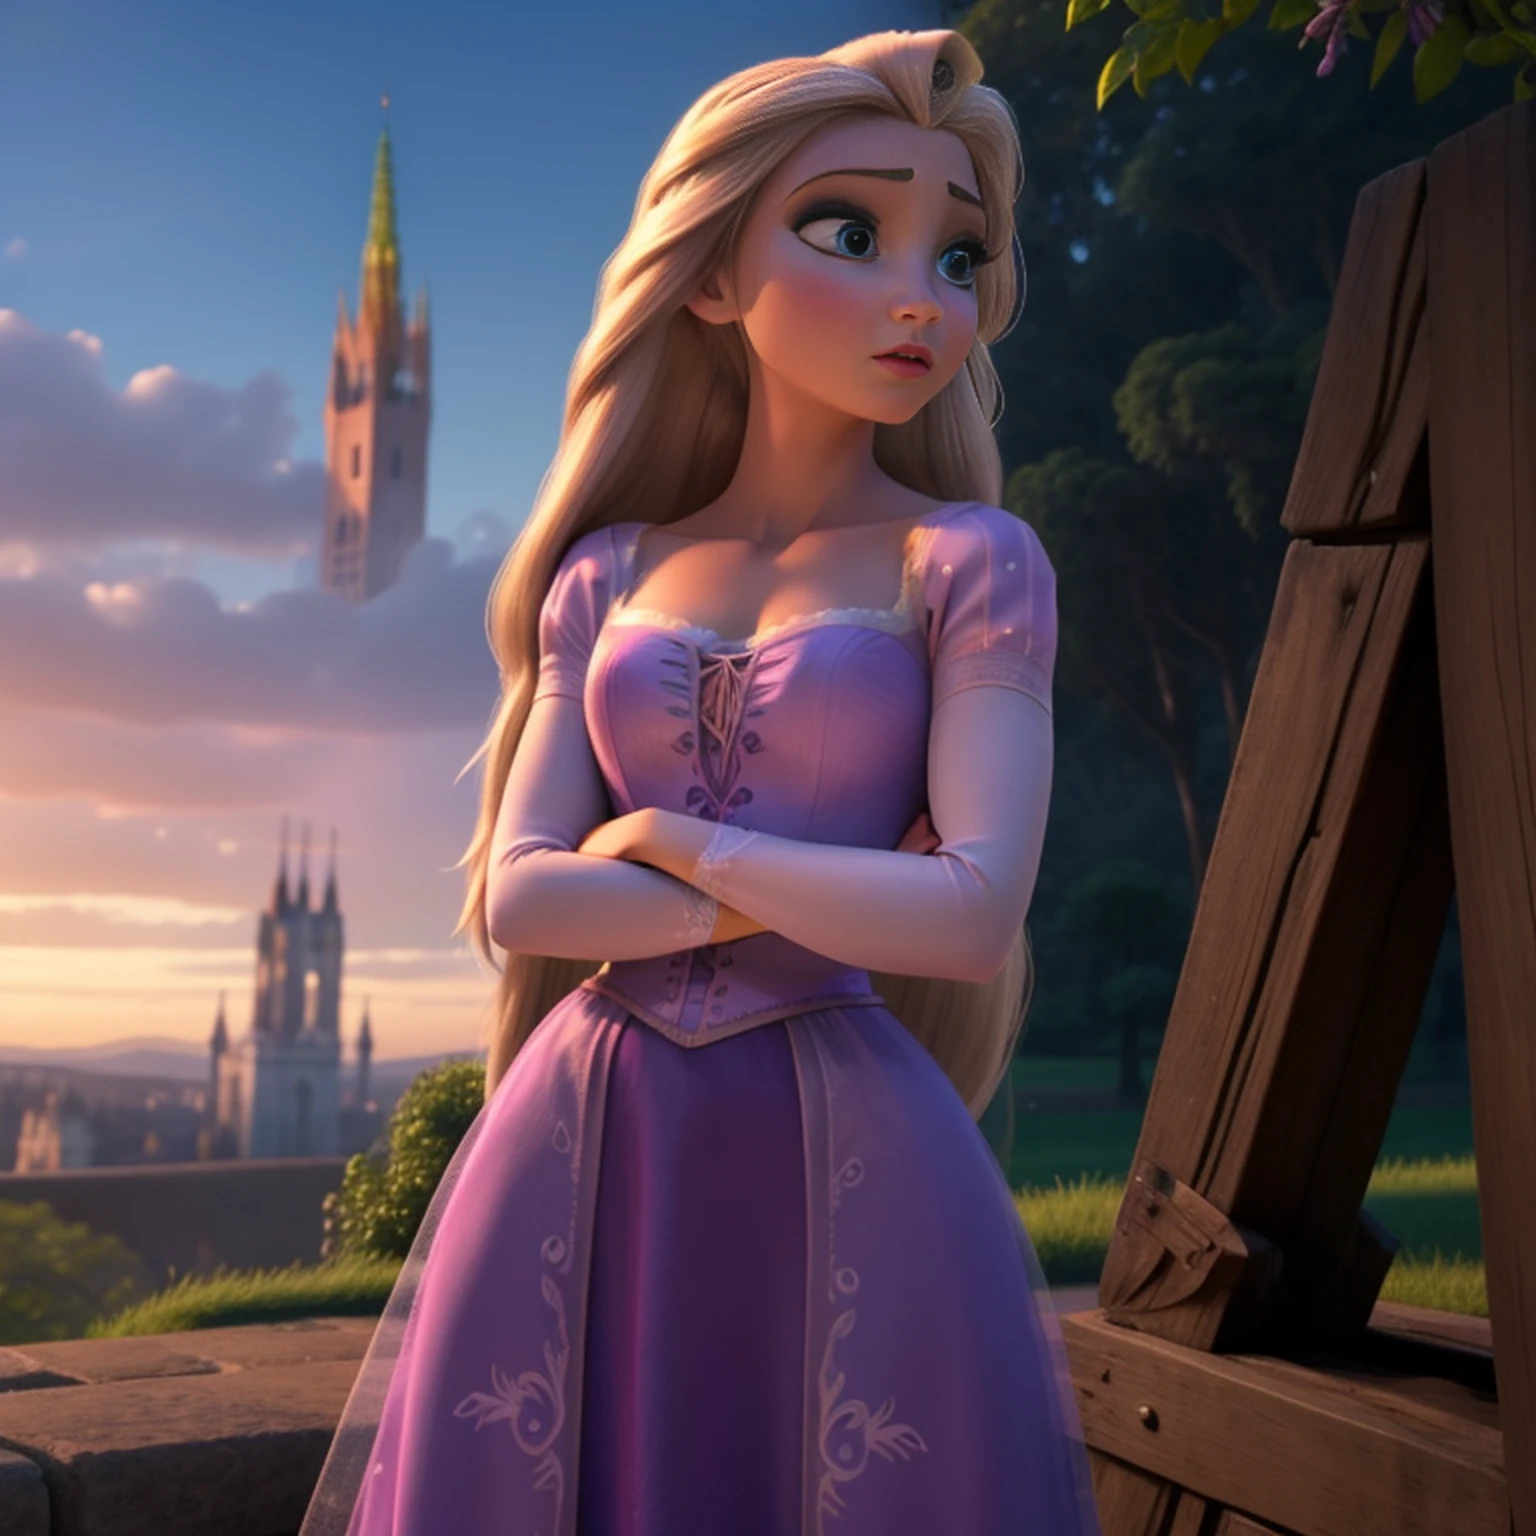 Elsa-Rapunzel Fusion, Merging models, Rapunzel&#39;s clothes, melting, 1girl, Beautiful, character, Woman, female, (master part:1.2), (best qualityer:1.2), (standing alone:1.2), ((struggling pose)), ((field of battle)), cinemactic, perfects eyes, perfect  skin, perfect lighting, sorrido, Lumiere, Farbe, texturized skin, detail, Beauthfull, wonder wonder wonder wonder wonder wonder wonder wonder wonder wonder wonder wonder wonder wonder wonder wonder wonder wonder wonder wonder wonder wonder wonder wonder wonder wonder wonder wonder wonder wonder wonder wonder, ultra detali, face perfect